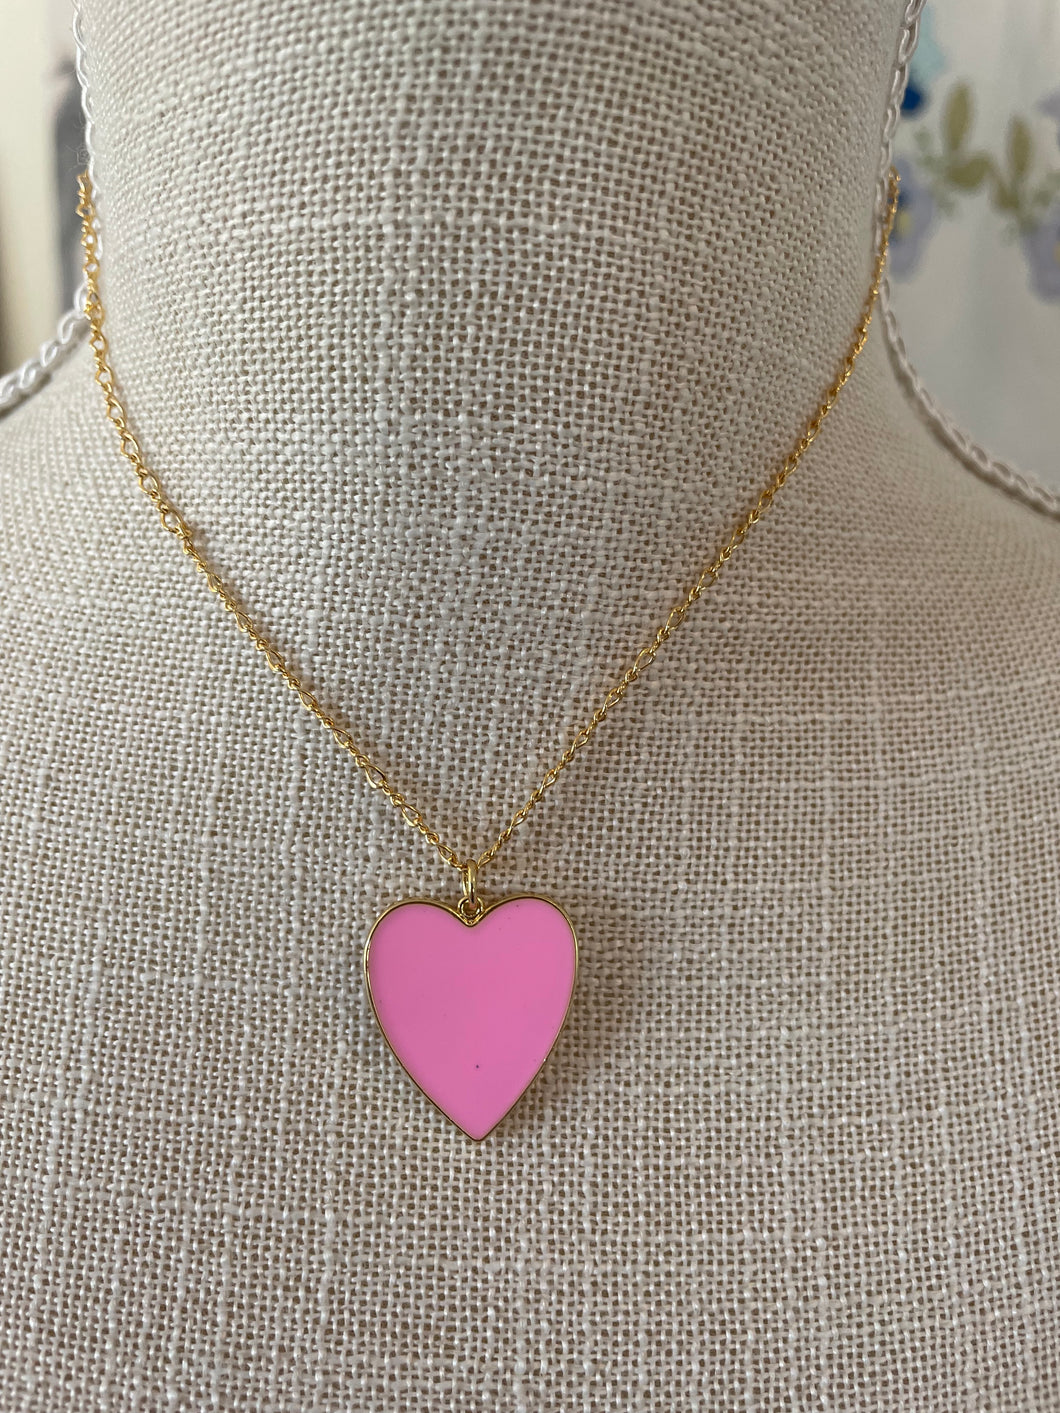 Gold Chain Necklace with Large Bright Pink Heart